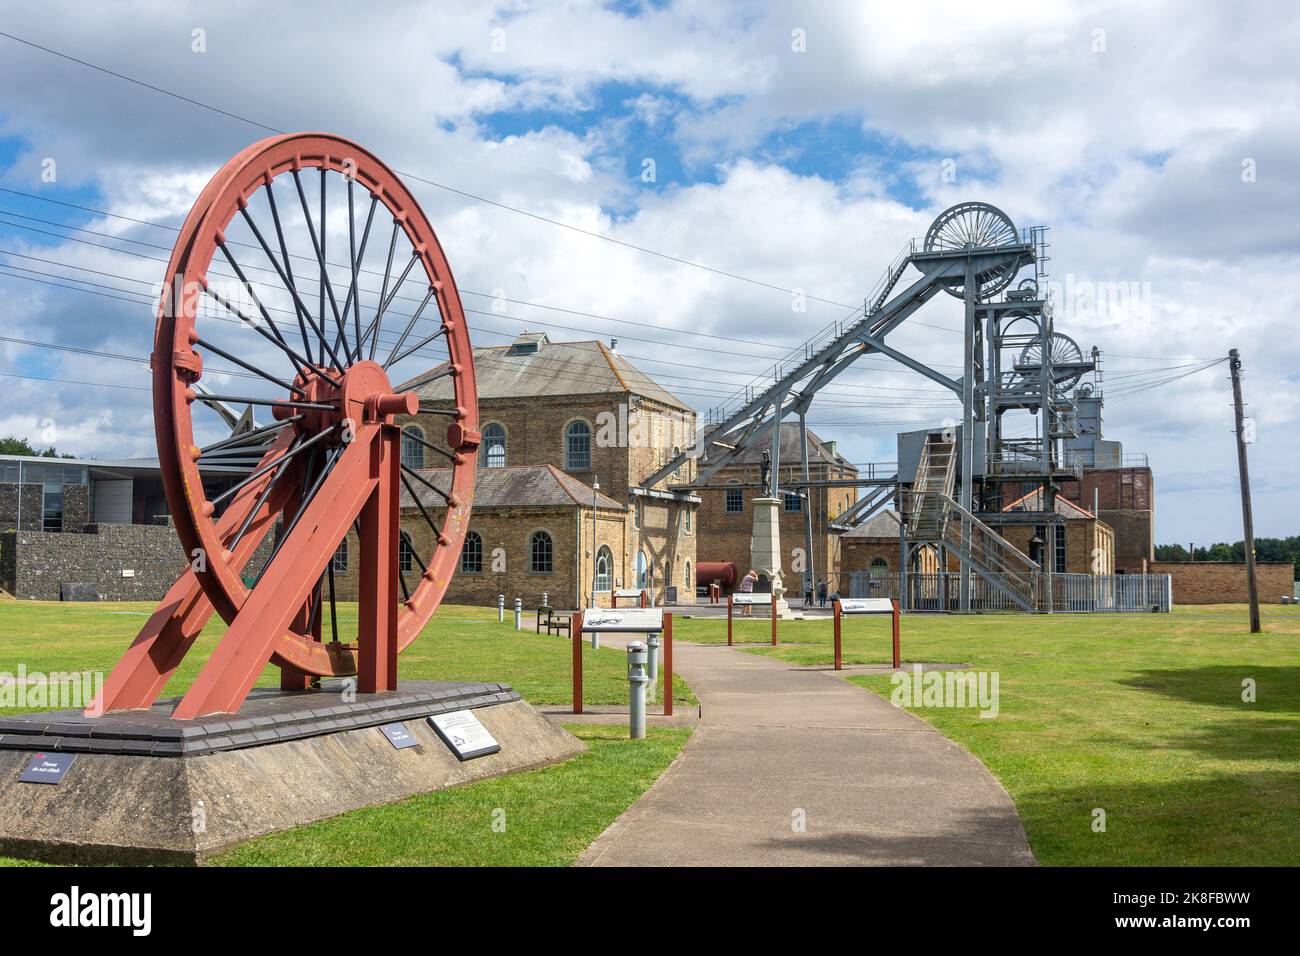 Pit Wheel and mine shafts at entrance to Woodhorn Museum, QE Country Park, Ashington, Northumberland, England, United Kingdom Stock Photo